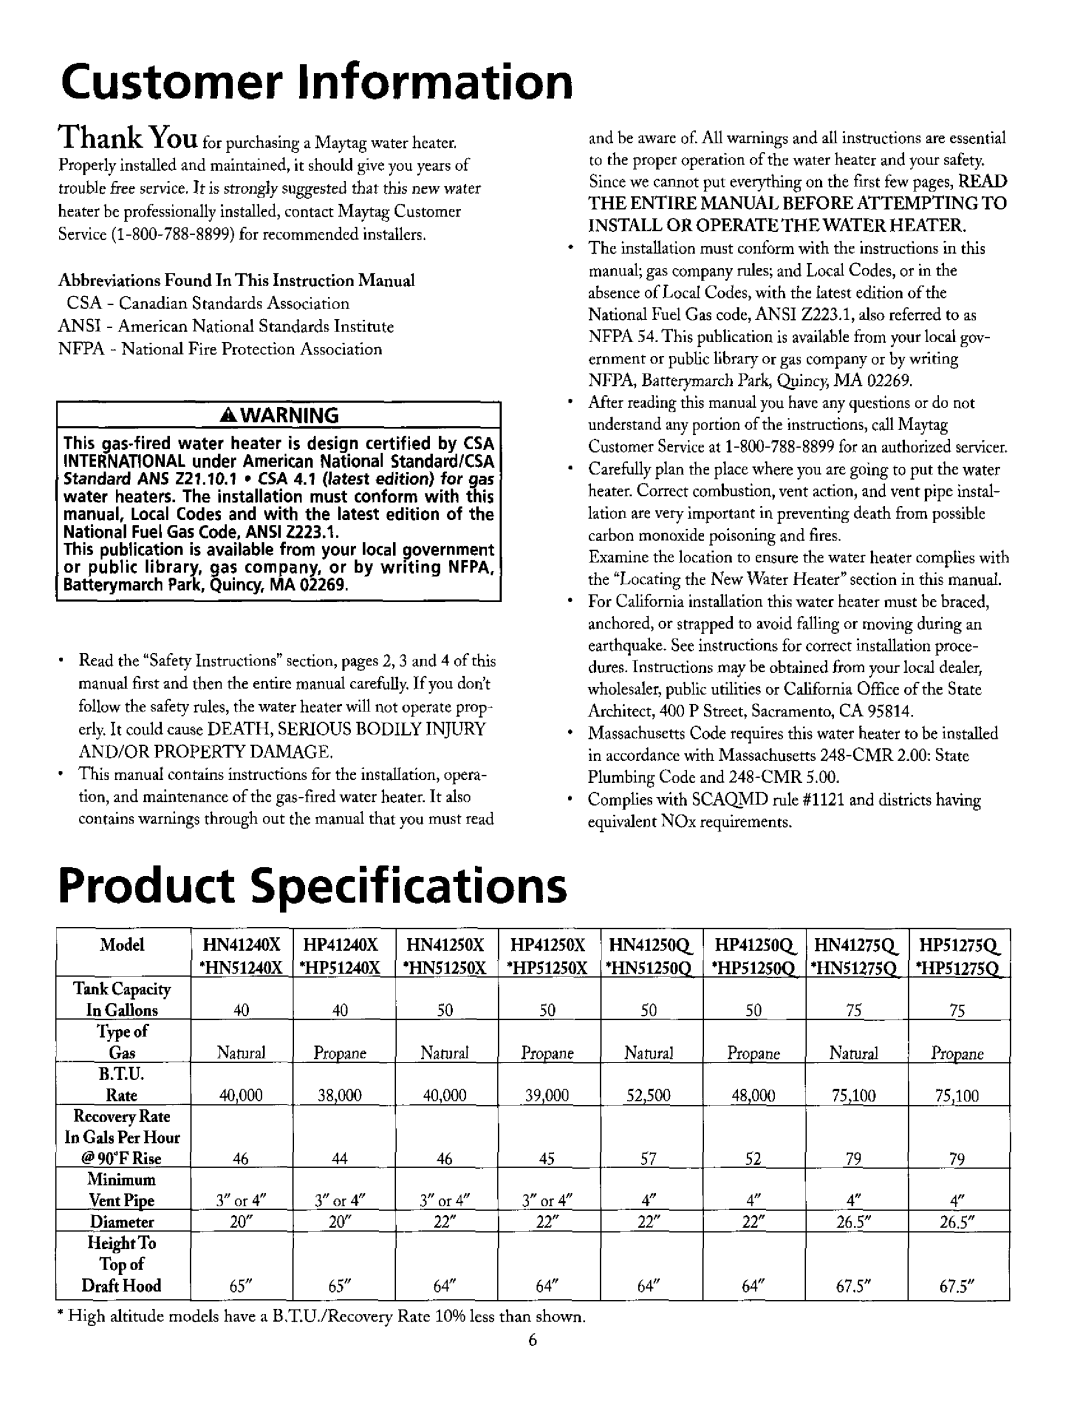 Maytag HN51240X, HN41240X manual Customer Information, Product Specifications 